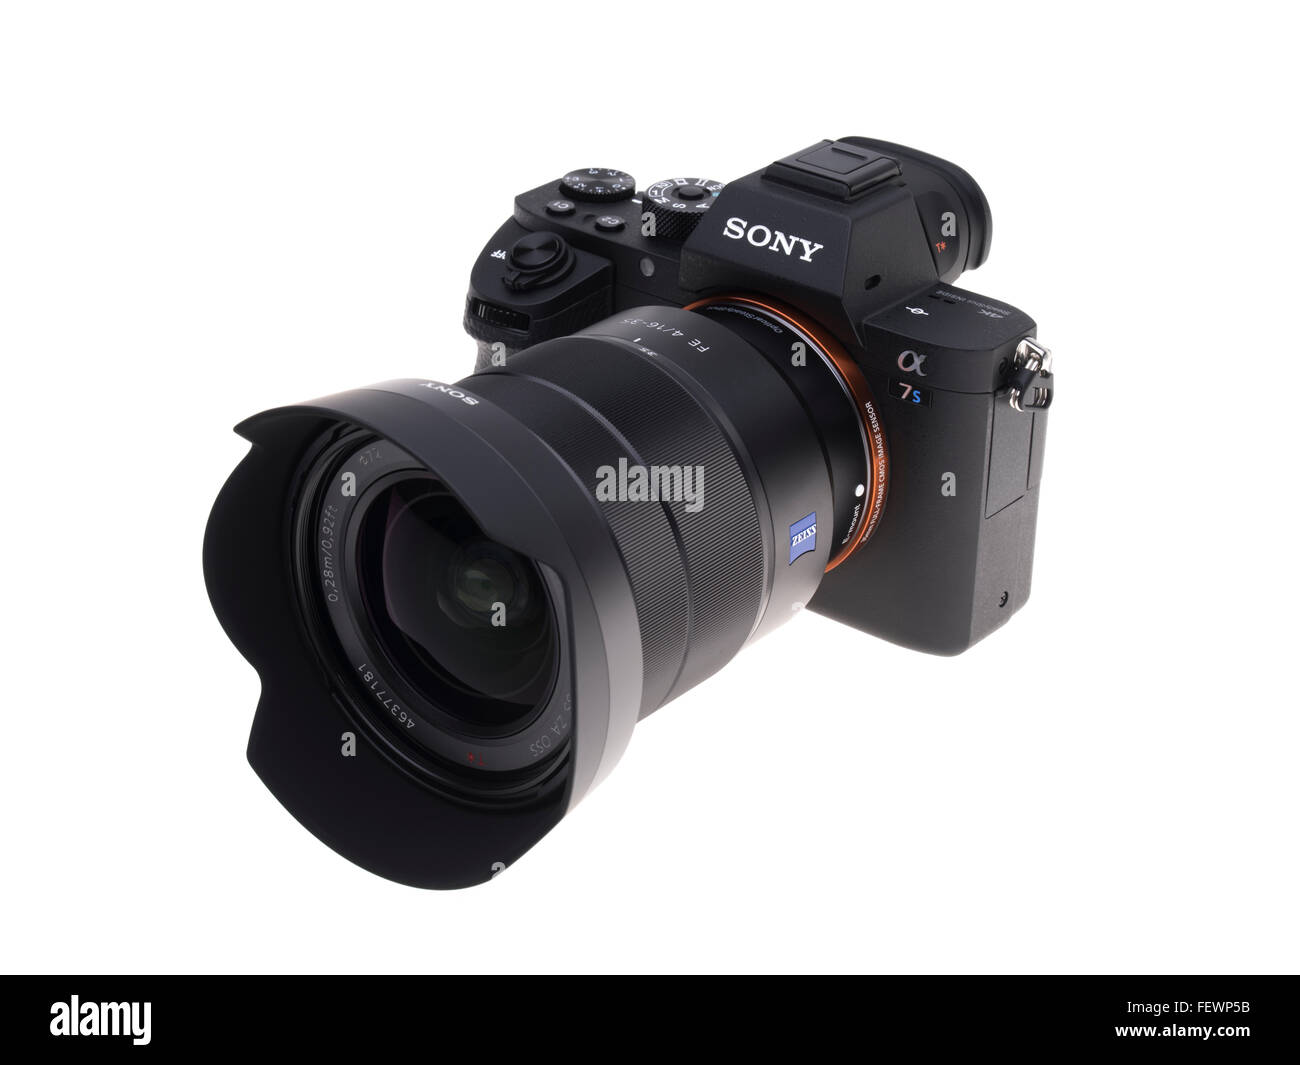 SONY A7Sii full-frame digital mirrorless camera release in 2015 with Sony / Zeiss 16-35mm lens Stock Photo